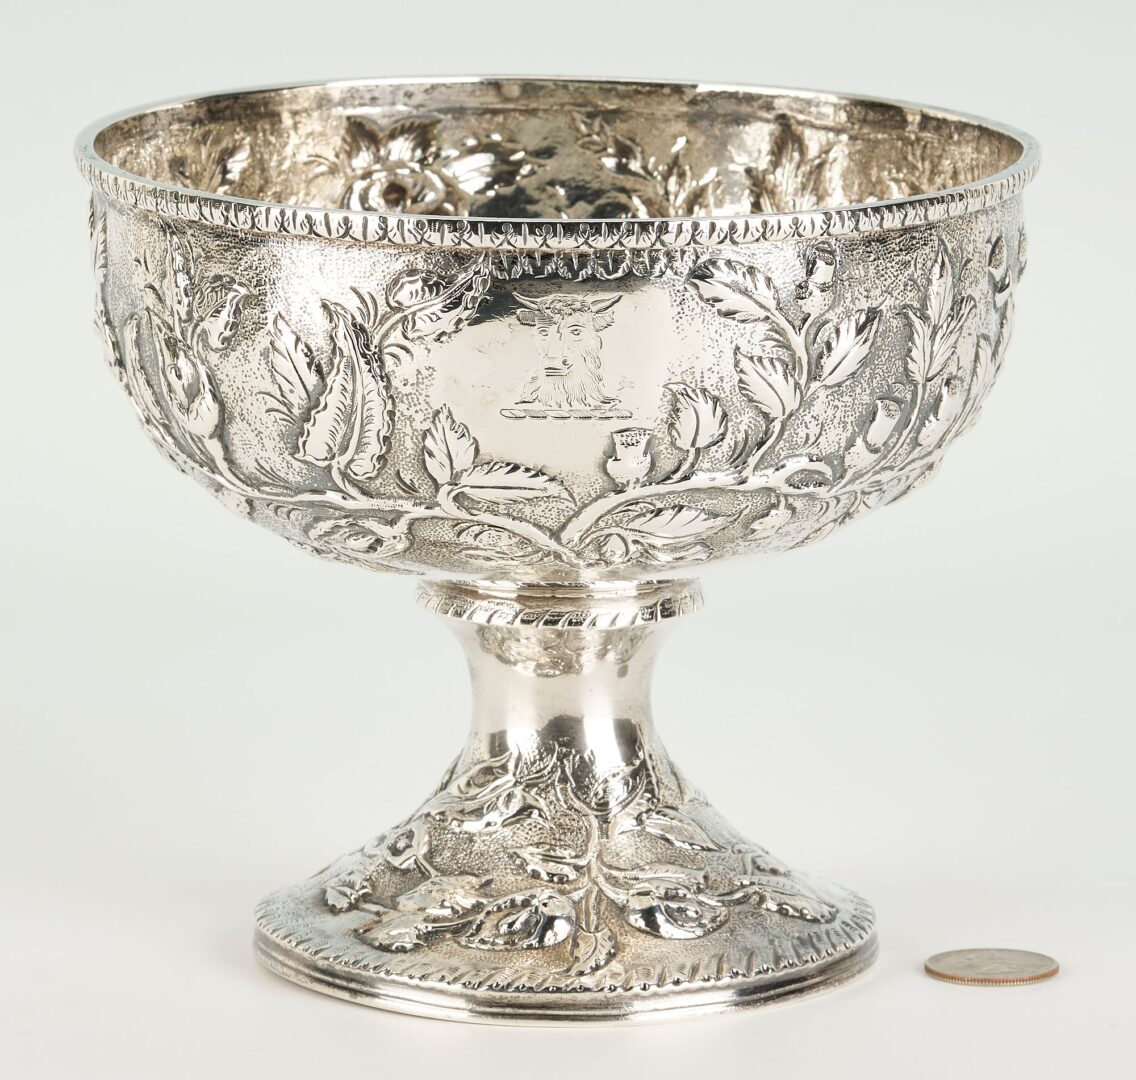 Lot 655: Kirk & Son Silver Repousse Compote, 19th century